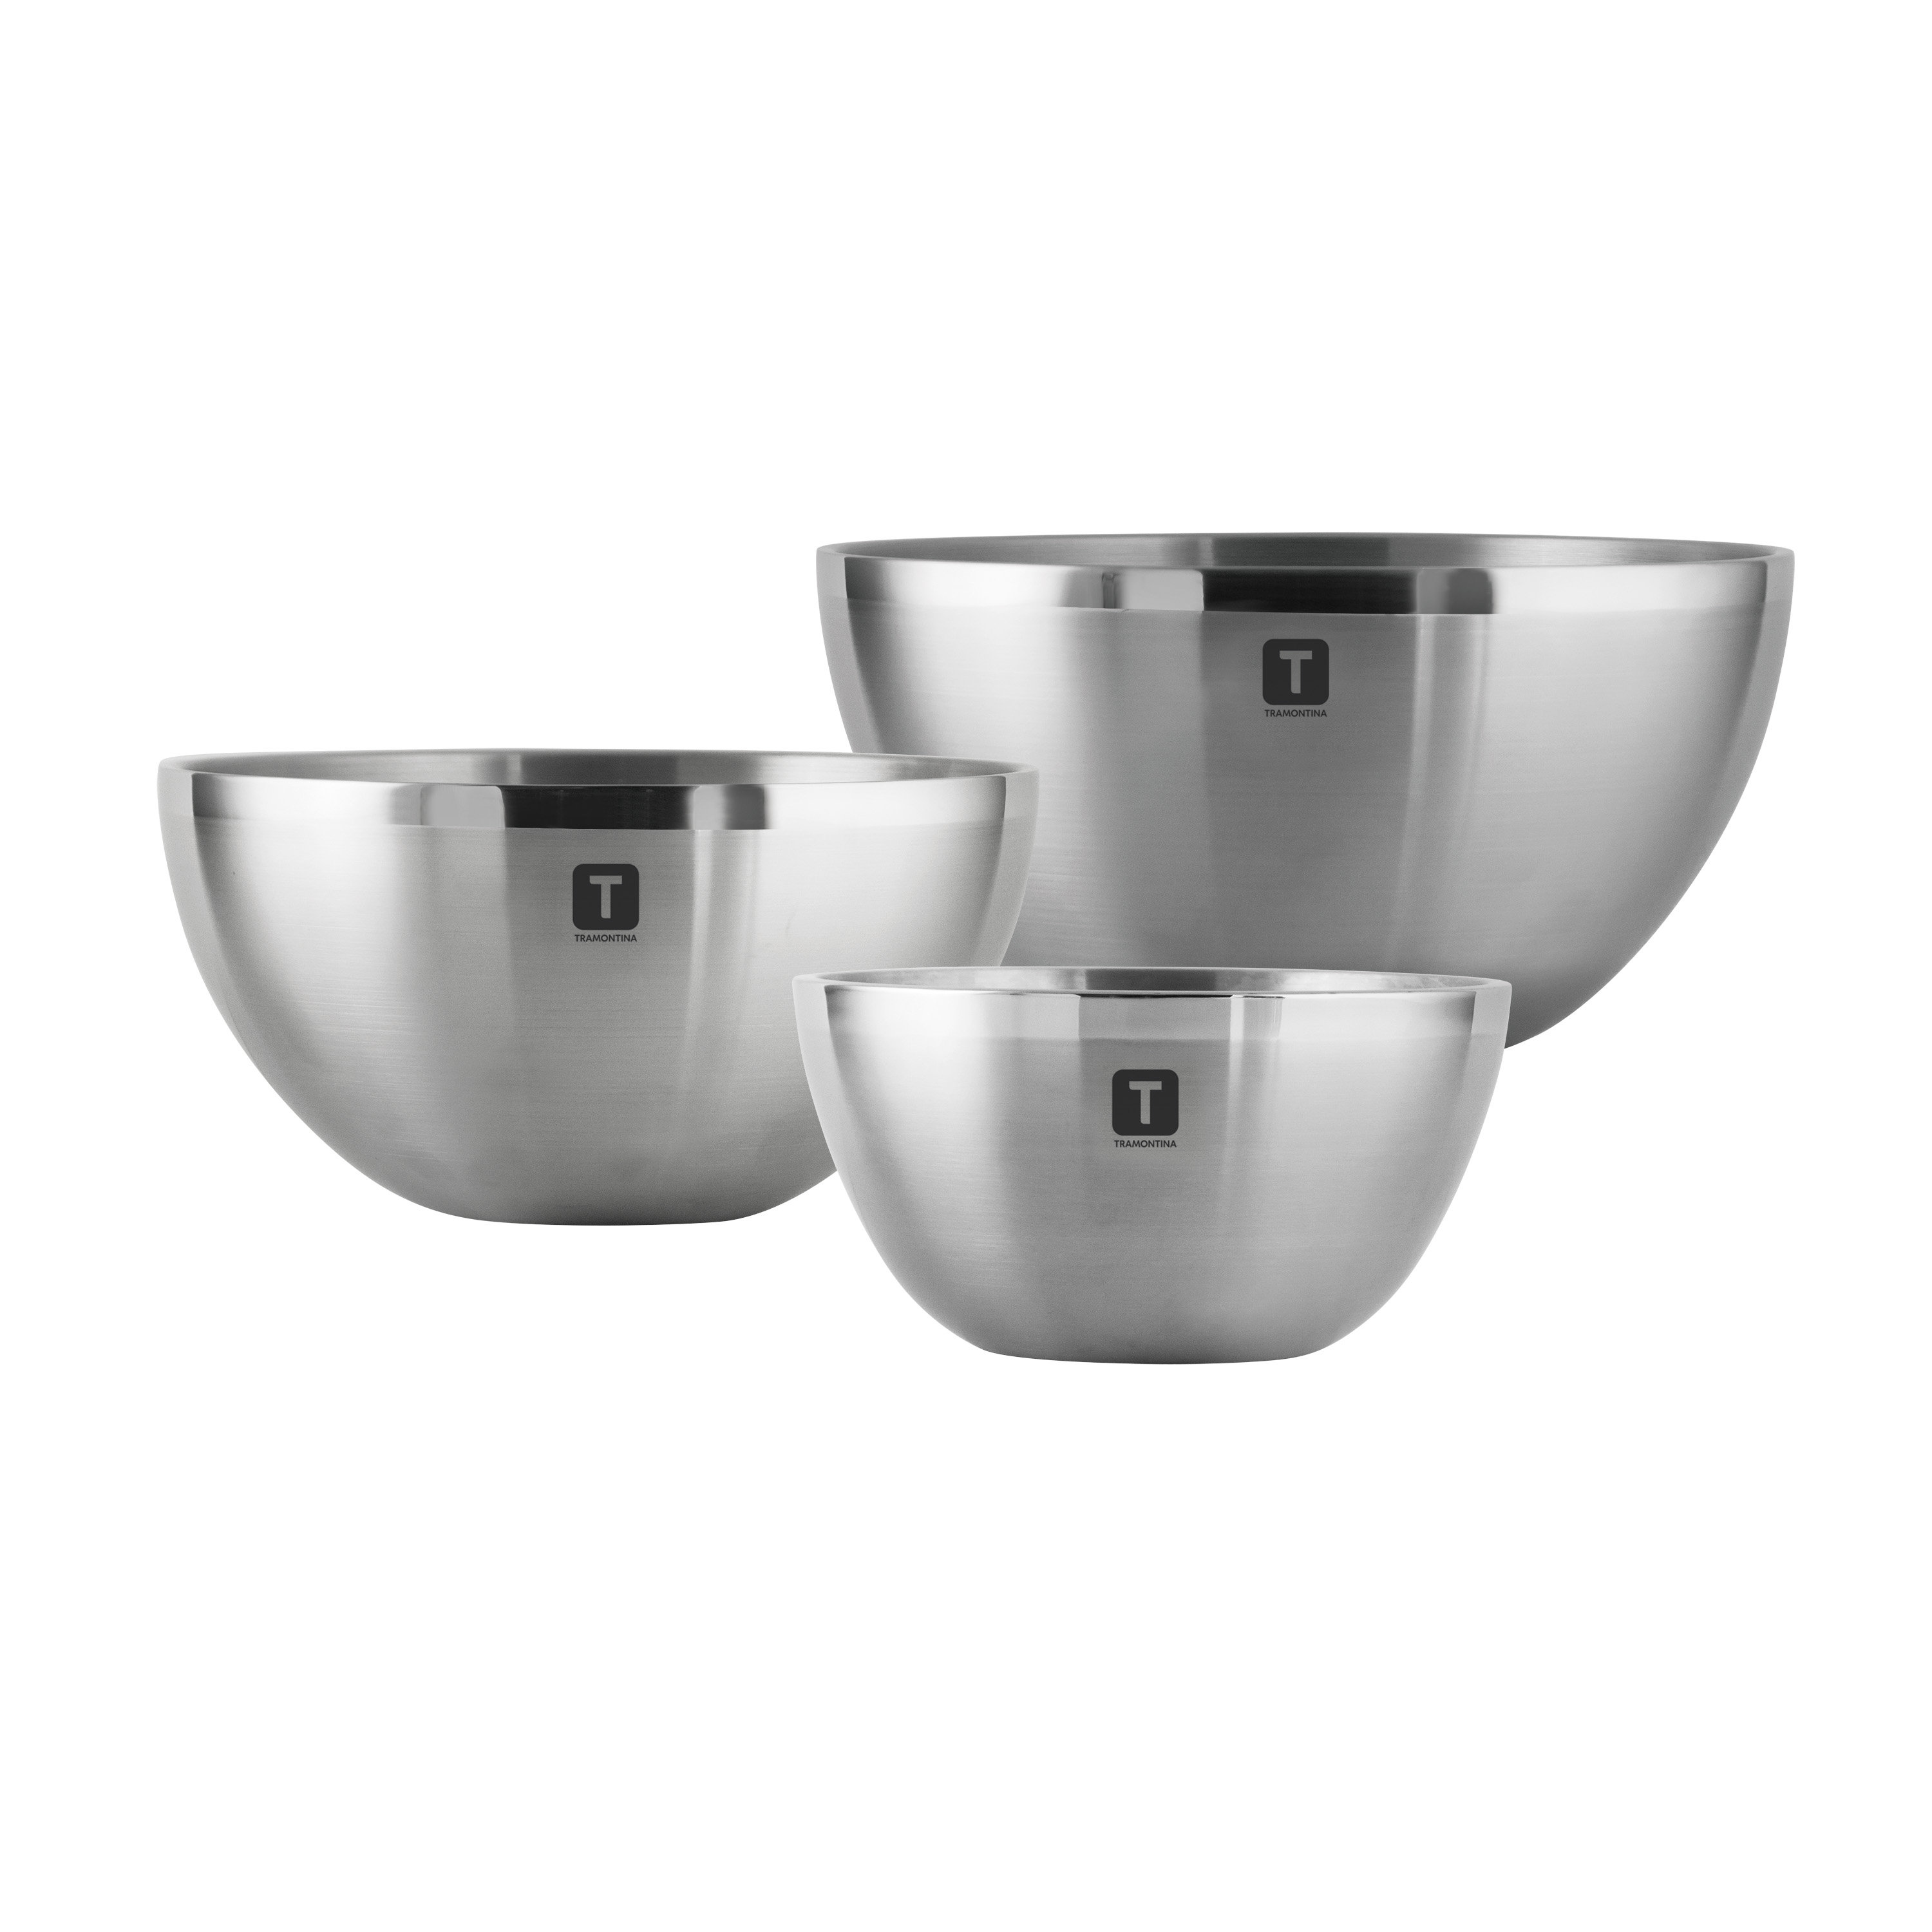  Tramontina Double Wall Mixing Bowls Stainless Steel (3